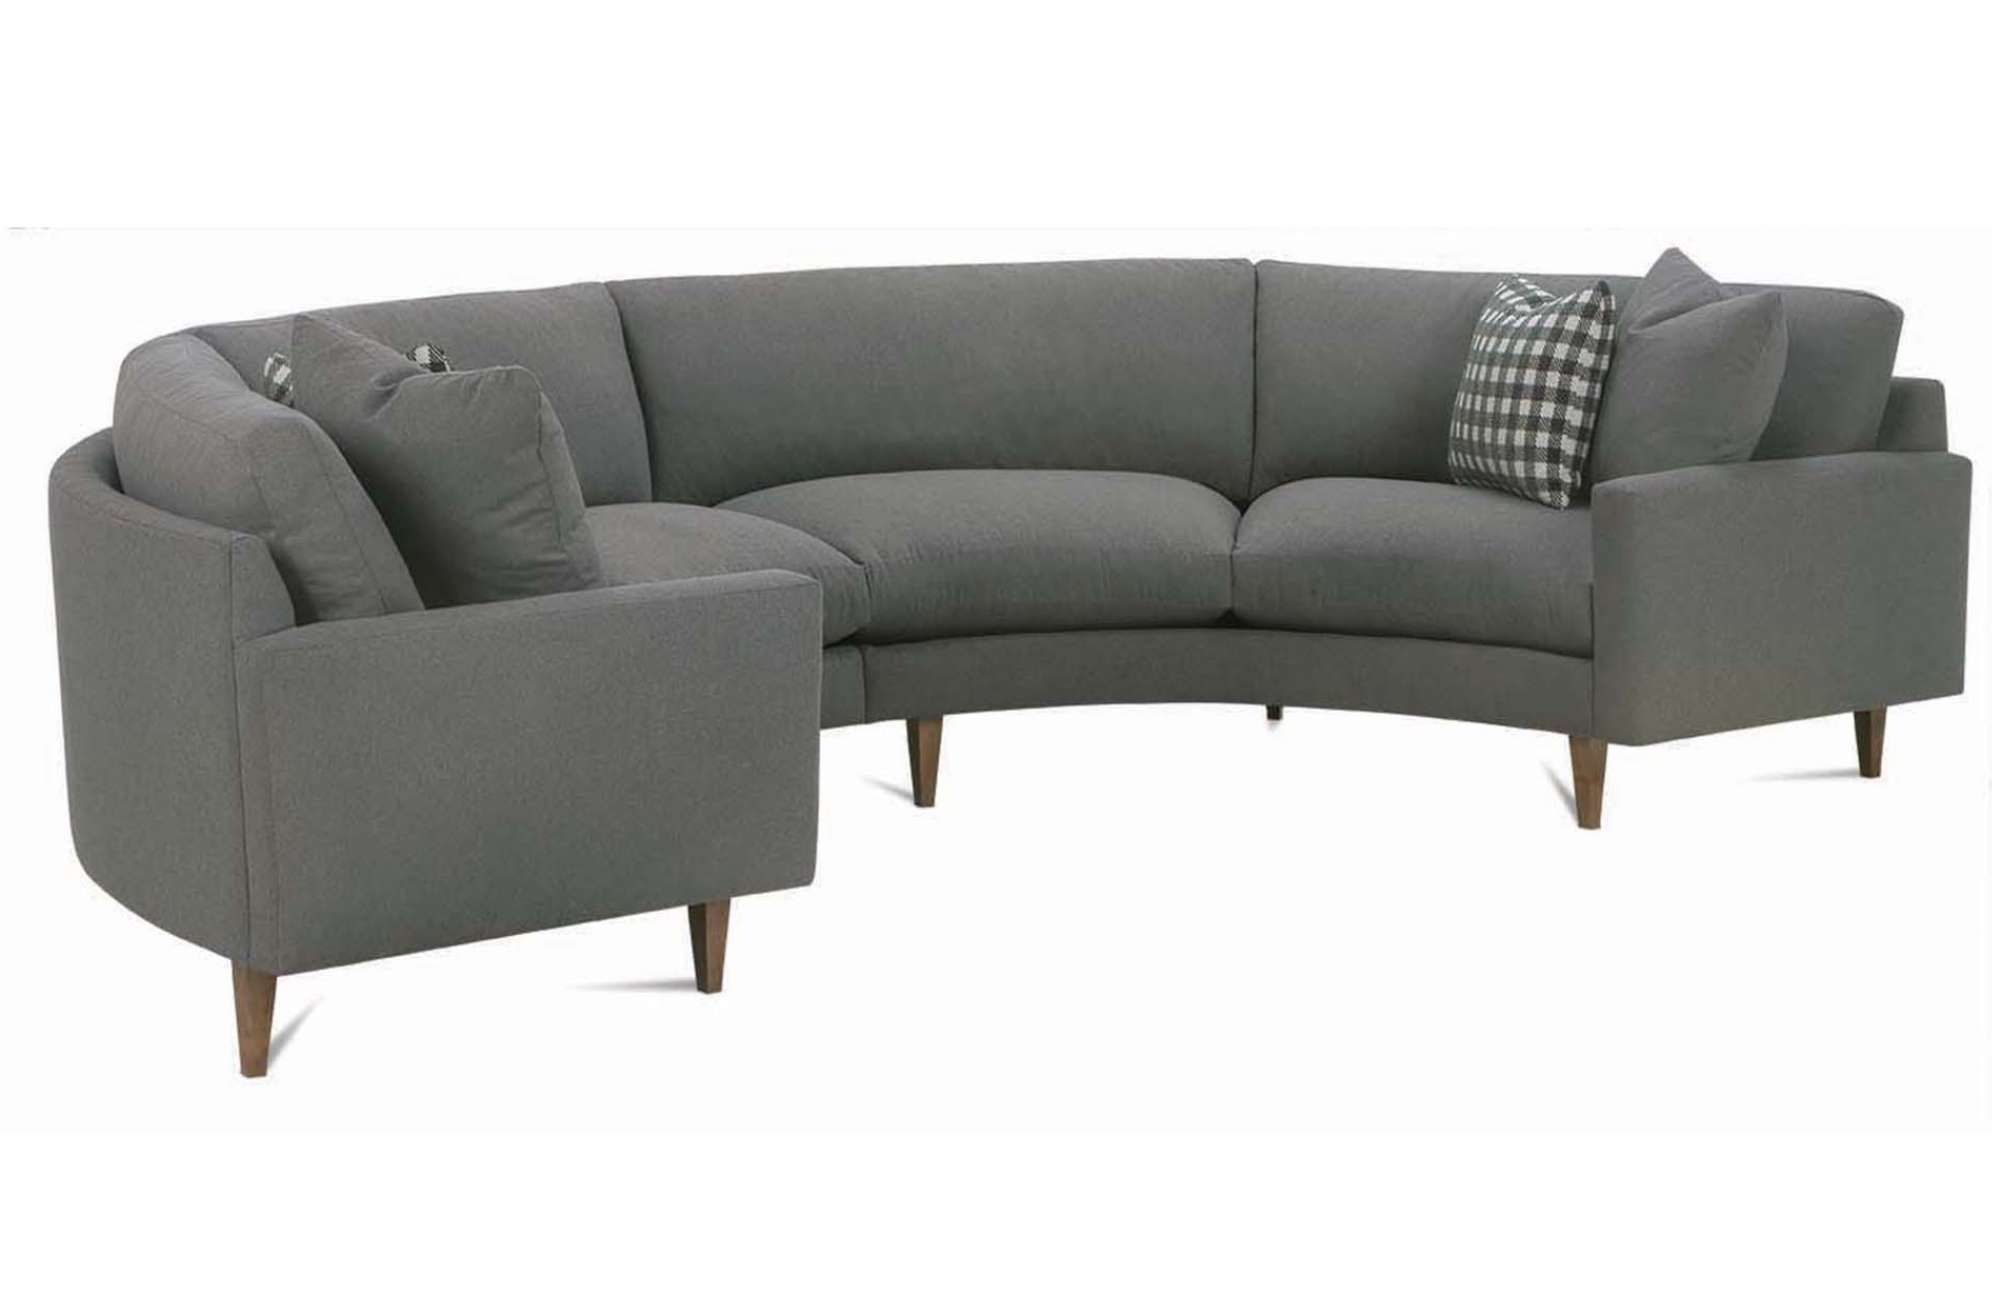 Ripley Curved Sectional – Mobilia With Regard To Most Recent 130" Curved Sectionals (View 11 of 15)